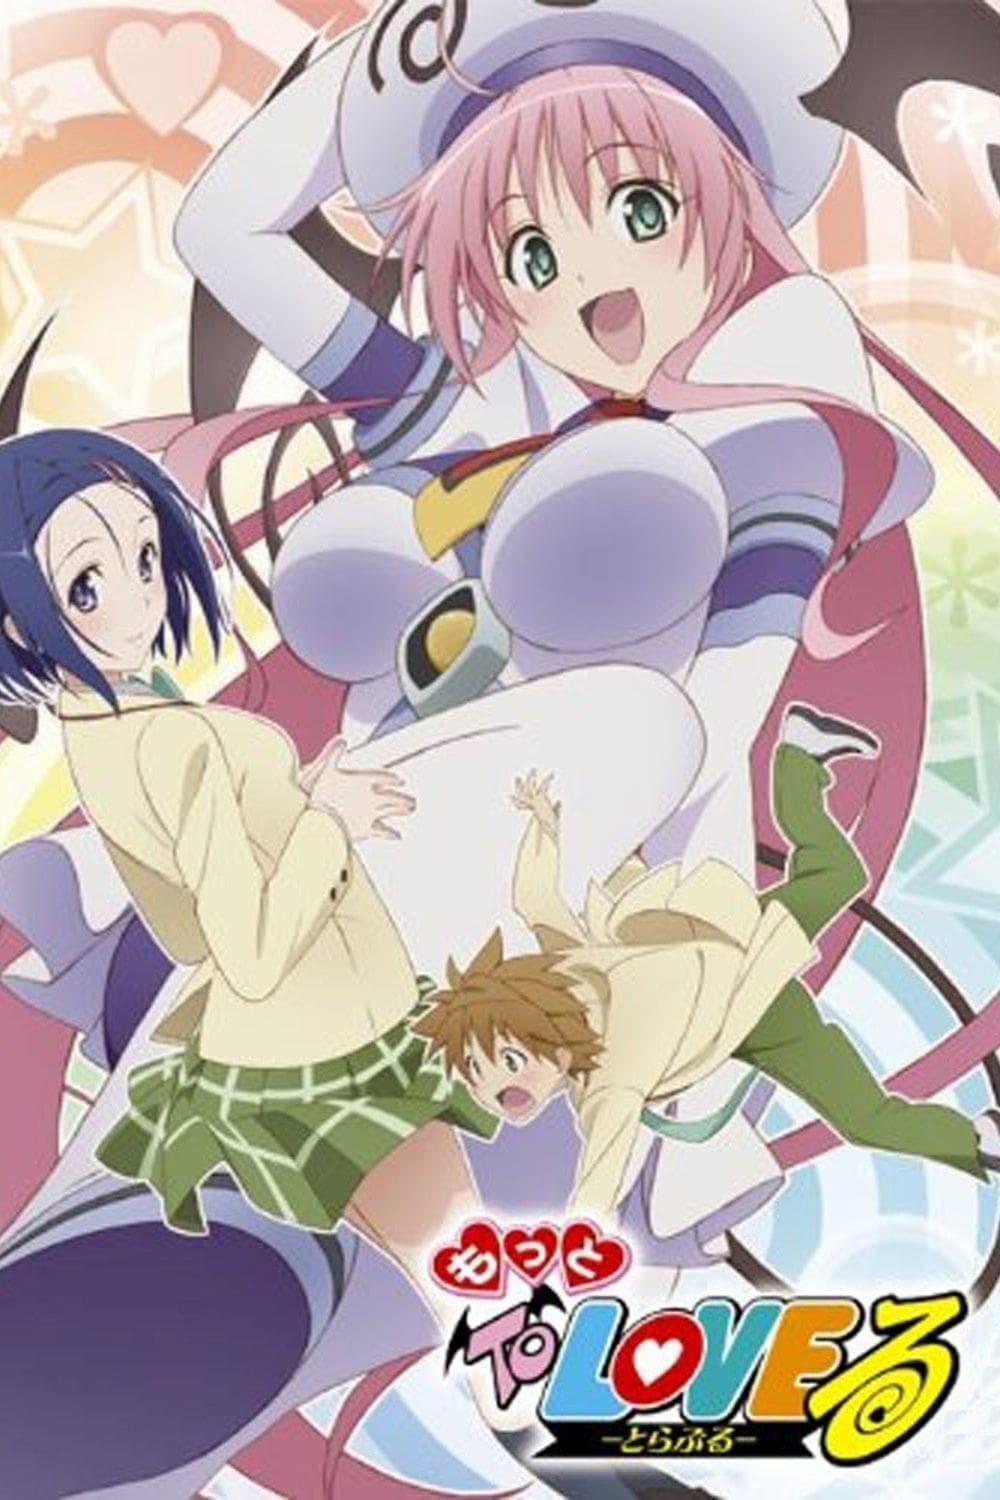 Watch Motto to Love Ru - S1:E3 Motto to Love Ru (2010) Online, Free Trial, The Roku Channel